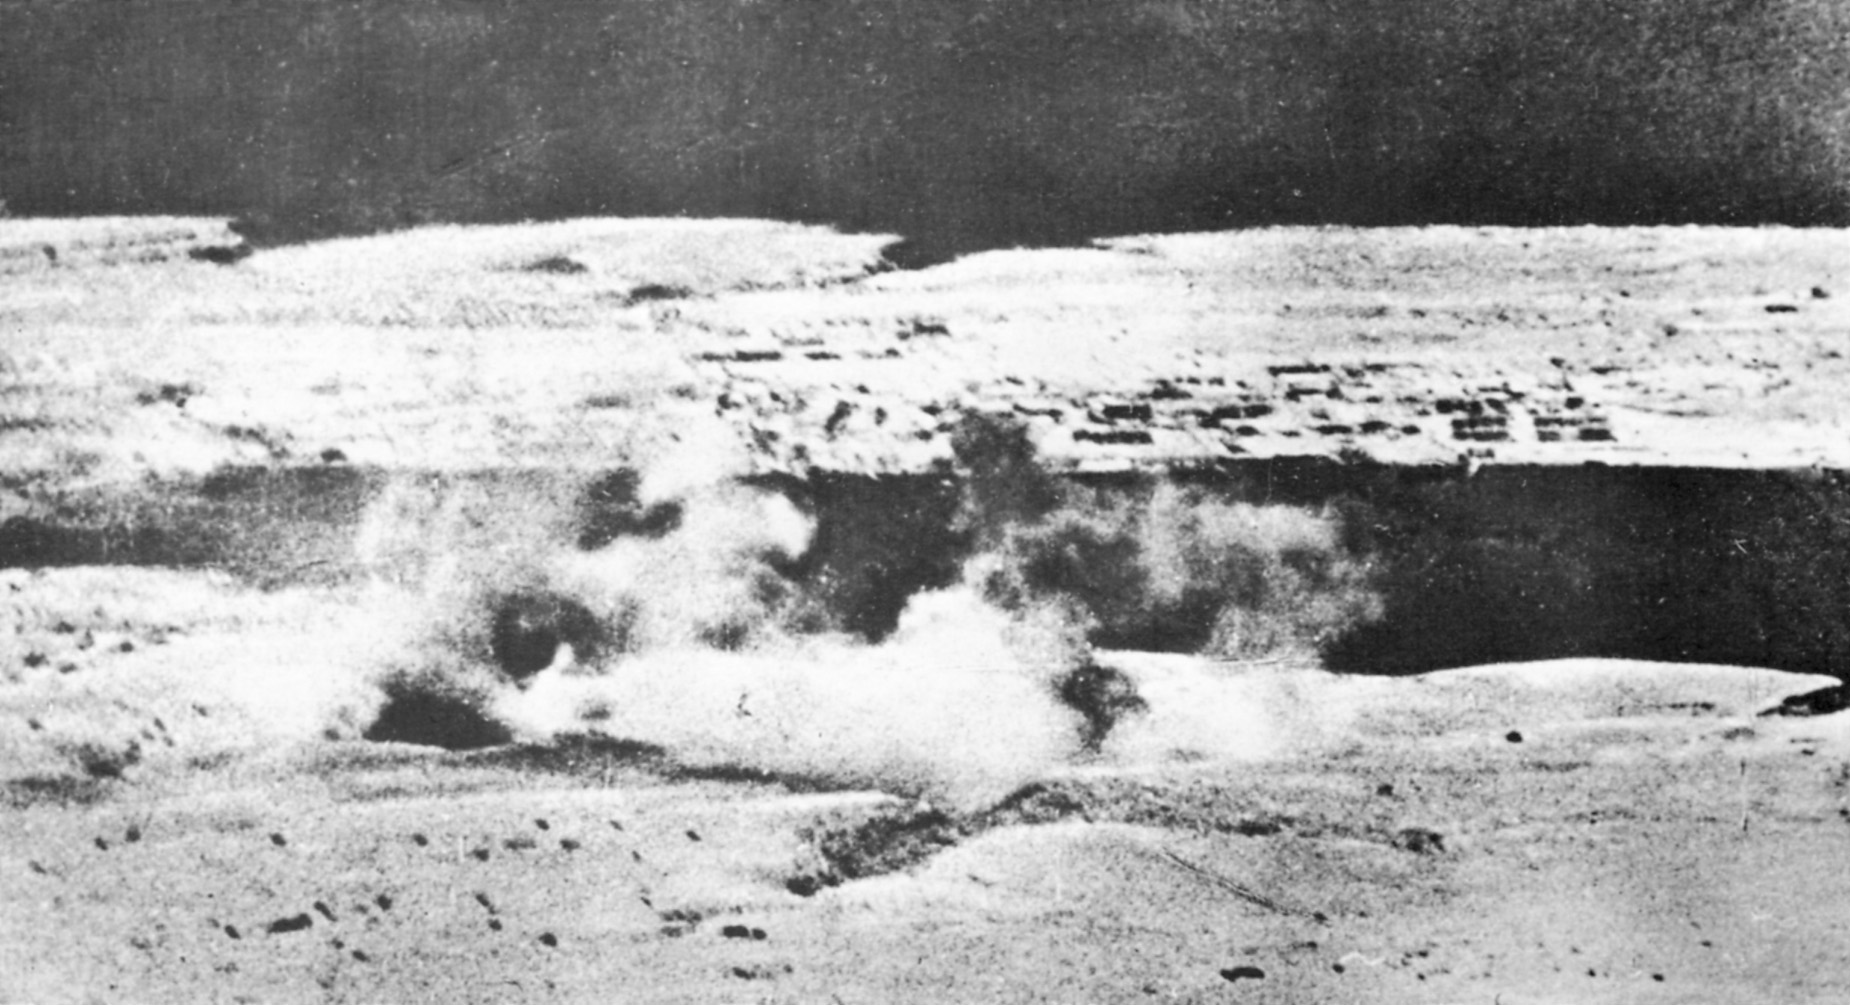 Smoke rises from German bombs during the major Luftwaffe air raid on Tobruk. The air assault preceded an all-out assault on city fortifications by Rommel’s panzers.